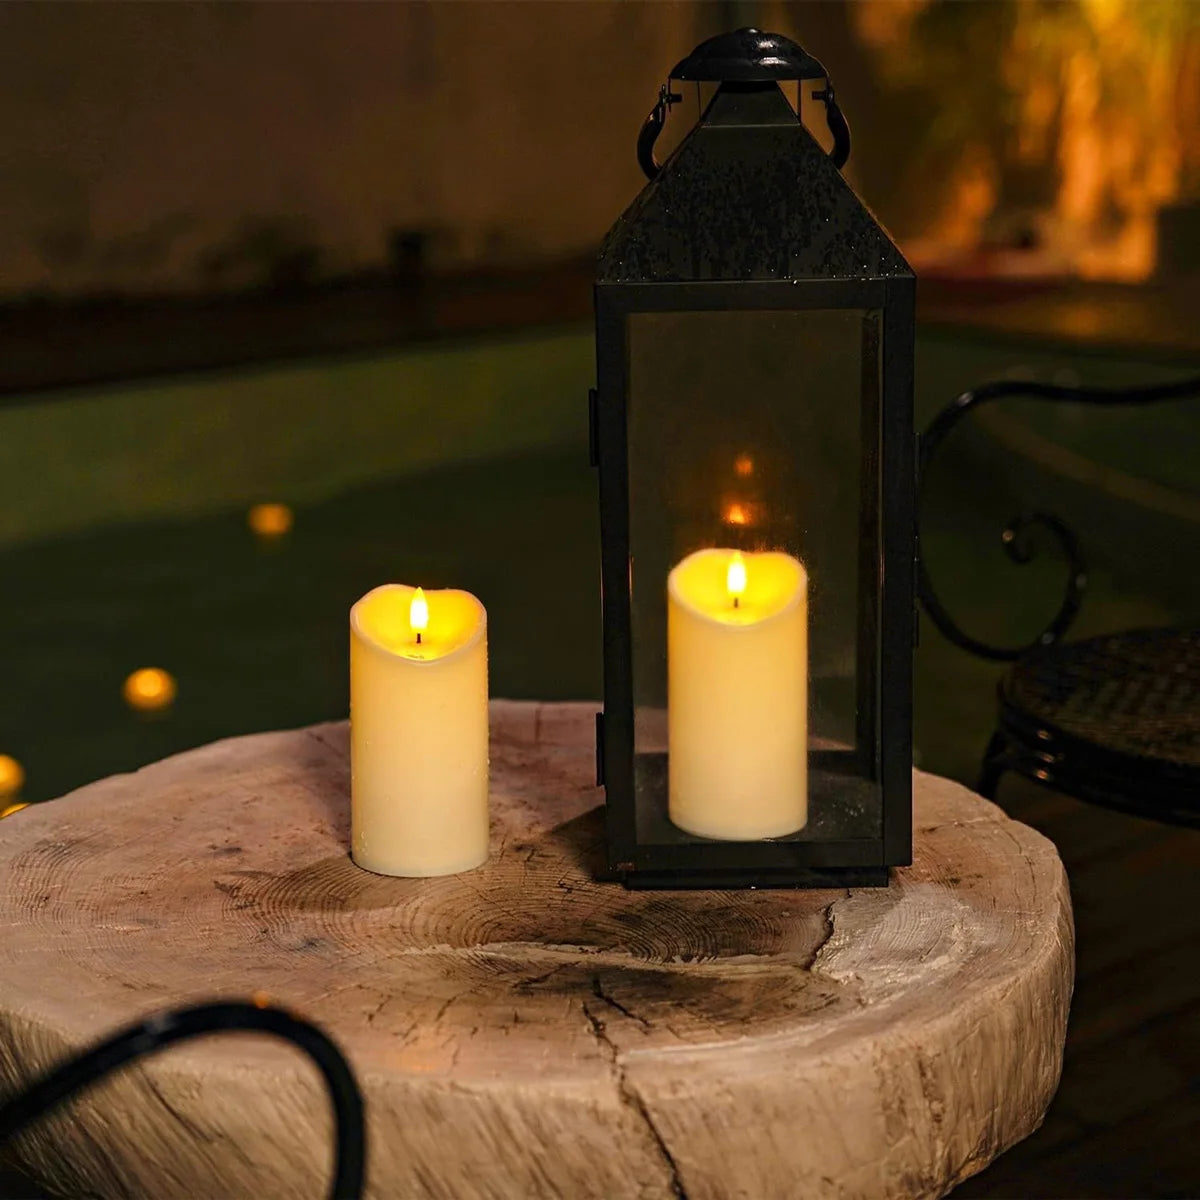 6”X3” Flameless Candles, Outdoor Waterproof Candles, Battery Operated Candles with Remote, Flickering LED Candles, Ivory White